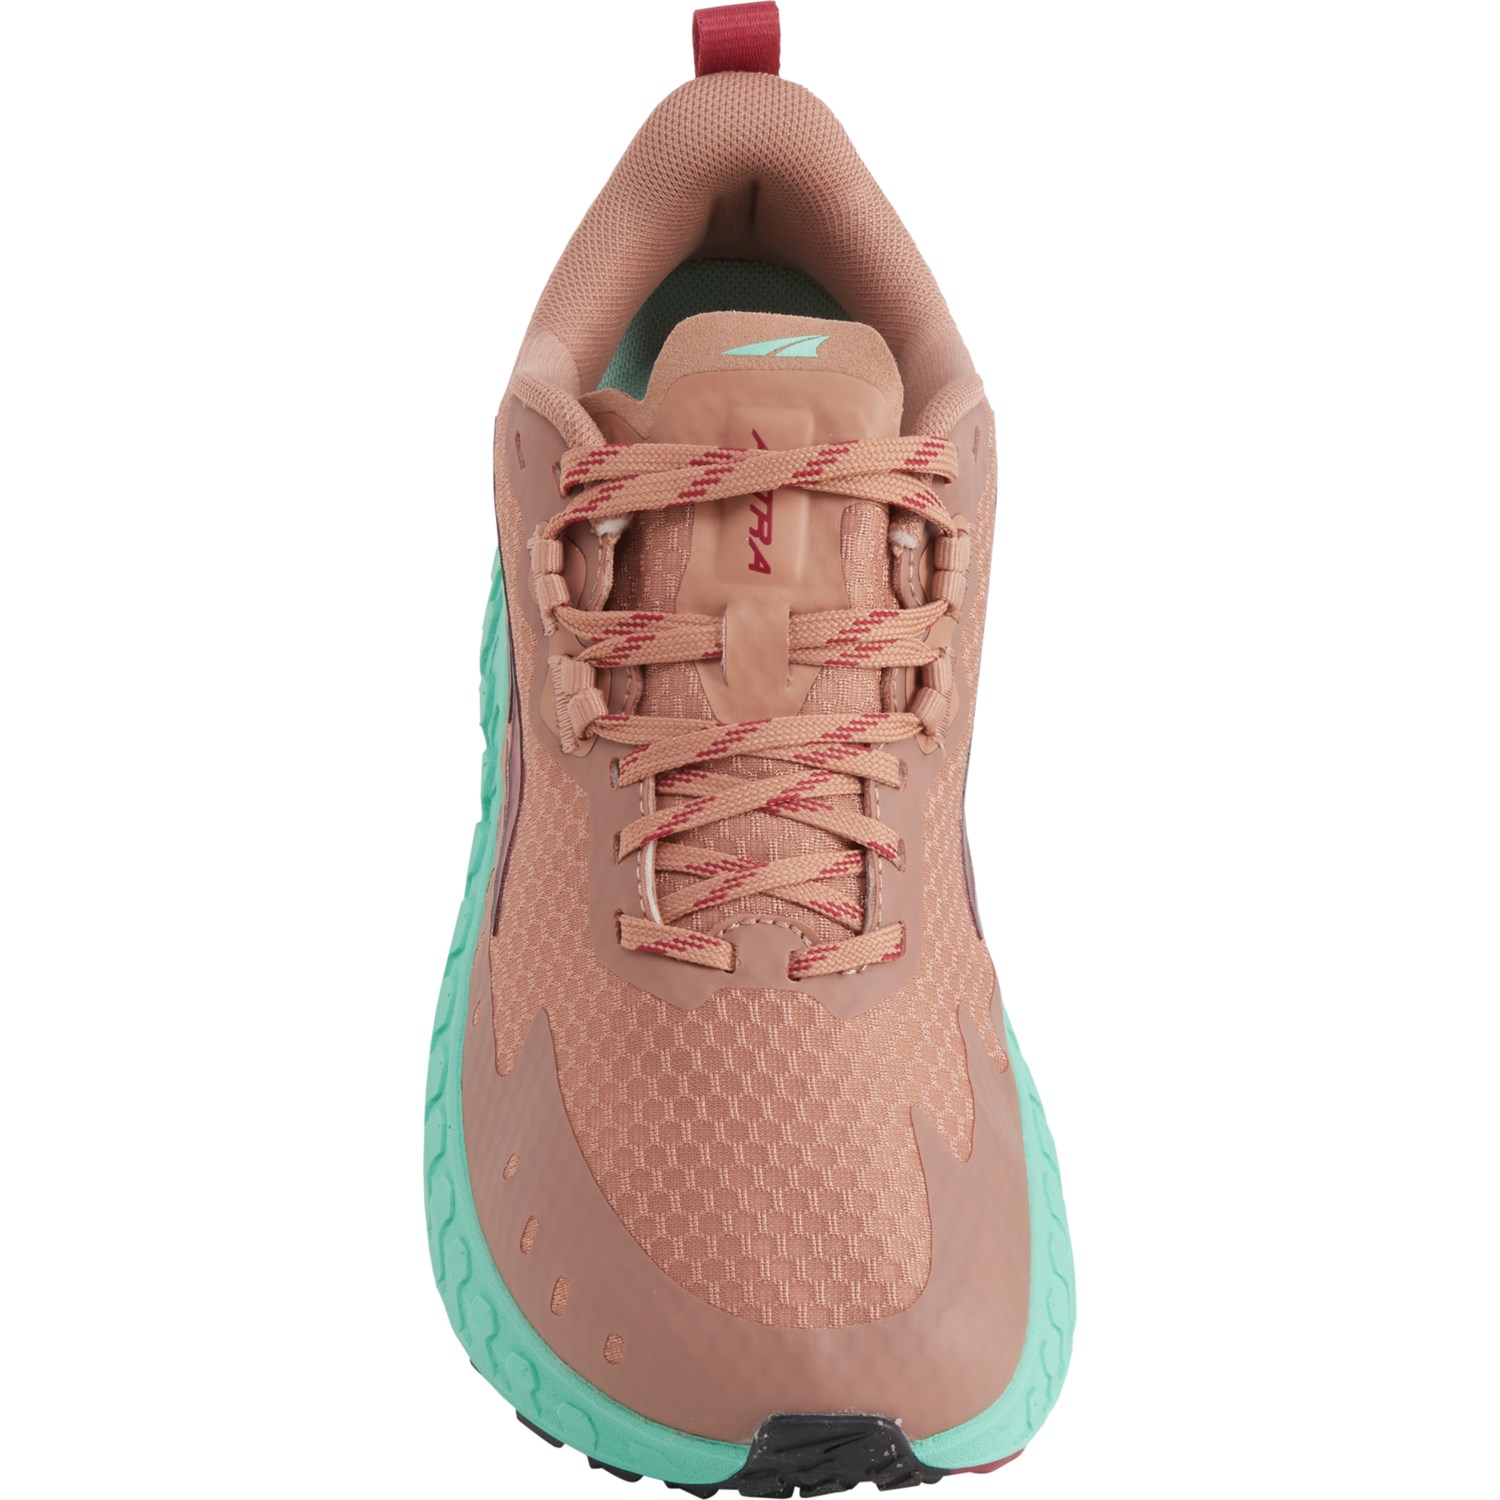 Altra Outroad Running Shoes (For Women) - Save 40%